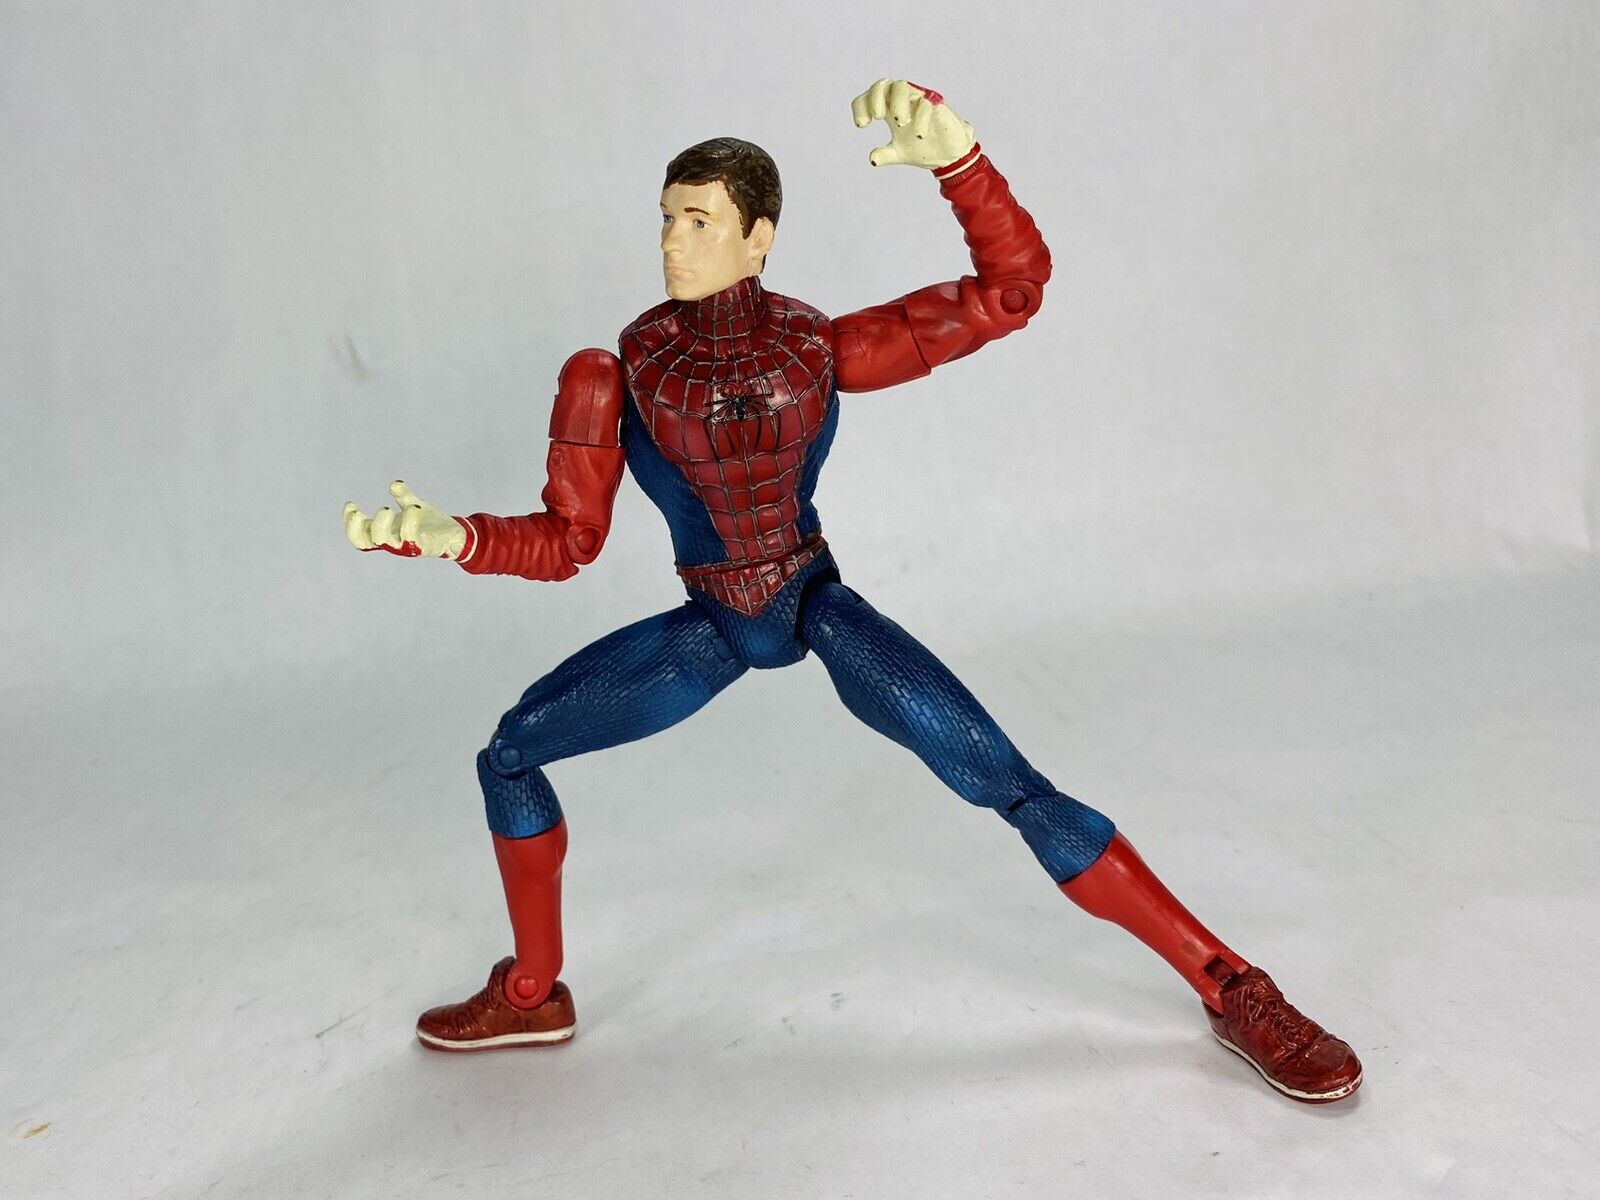 Incomplete 6” Spider-Man Wrestler Movie Action Figure Changeable Parts